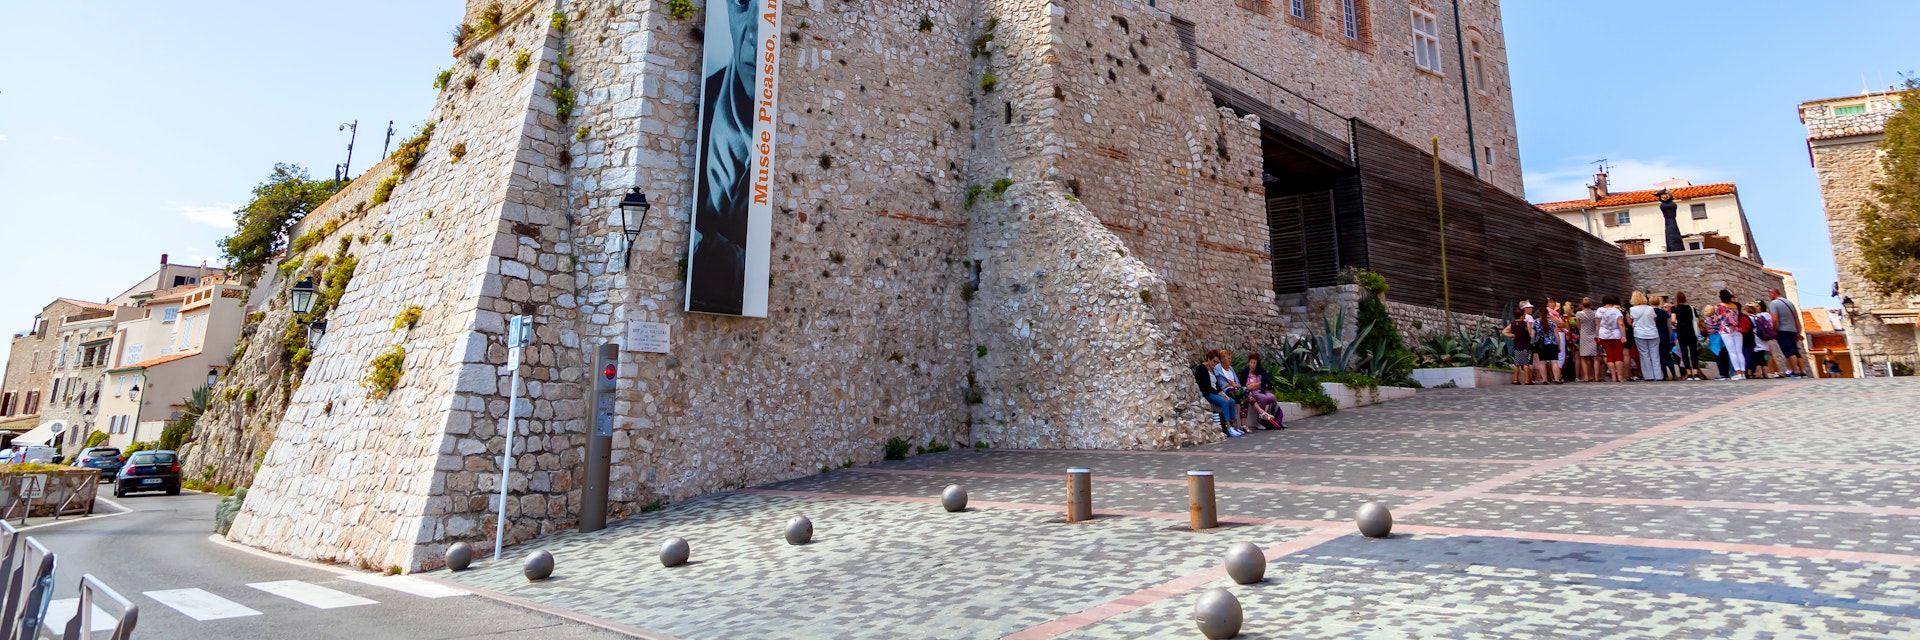 The Picasso Museum at Grimaldi Castle in Antibes, France.